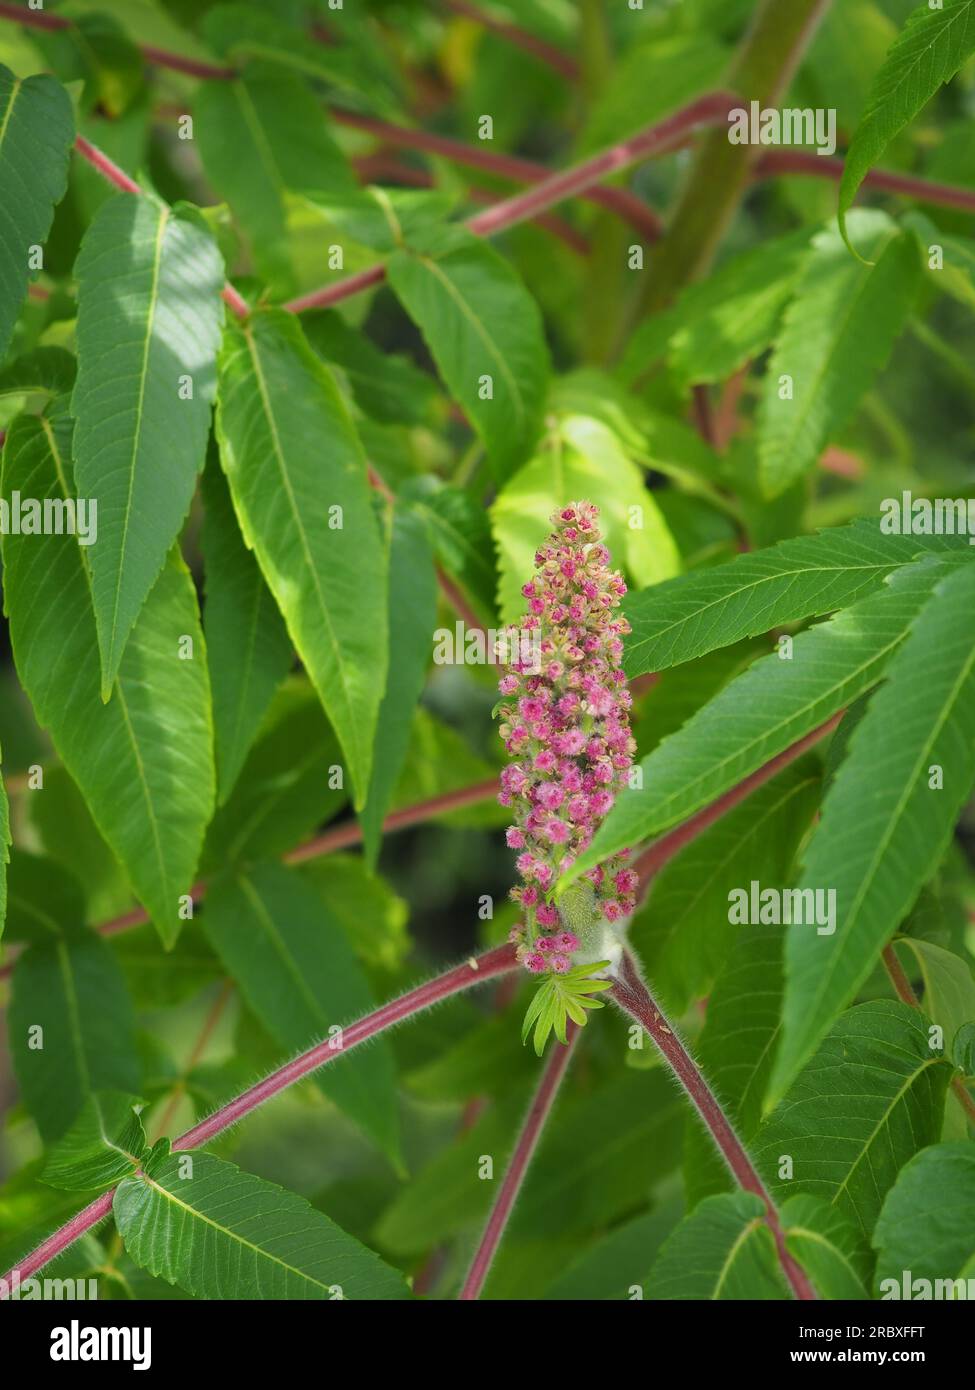 Close up of the pendulous pink flower / fruit of a Rhus typhina (Staghorn Sumach) tree in June in a British garden Stock Photo